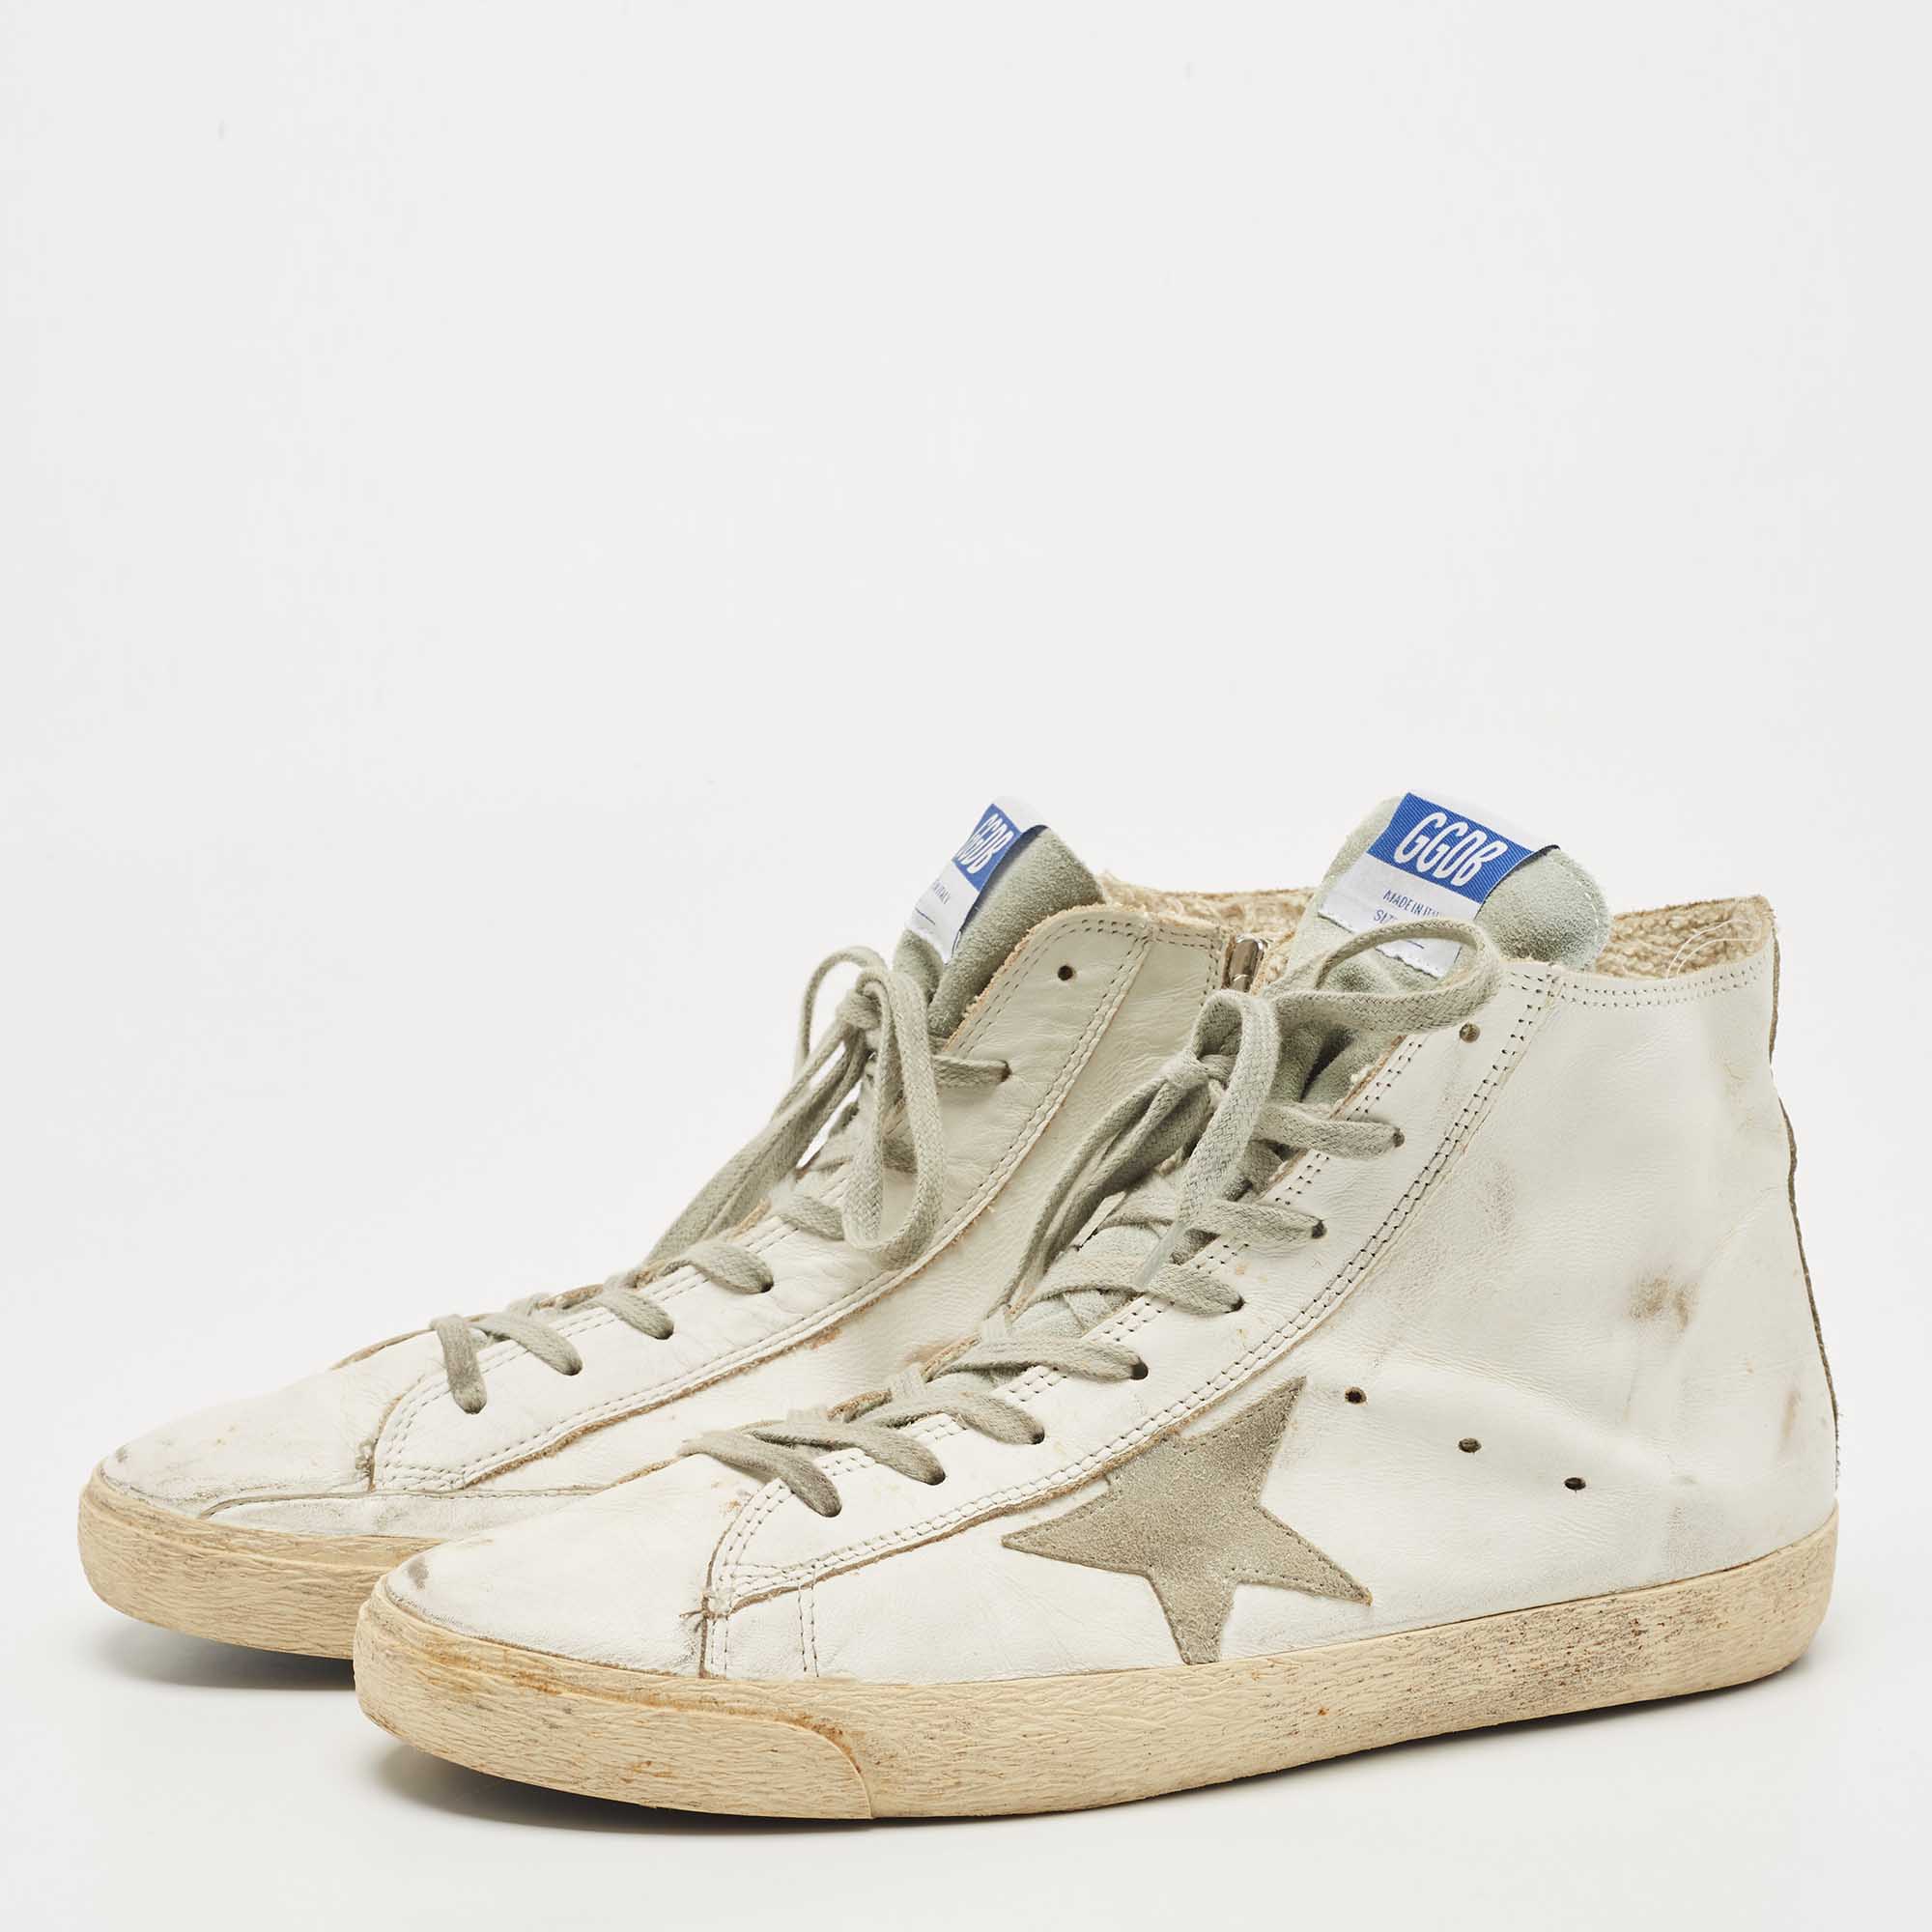 

Golden Goose White Leather Francy High Top Sneakers Size